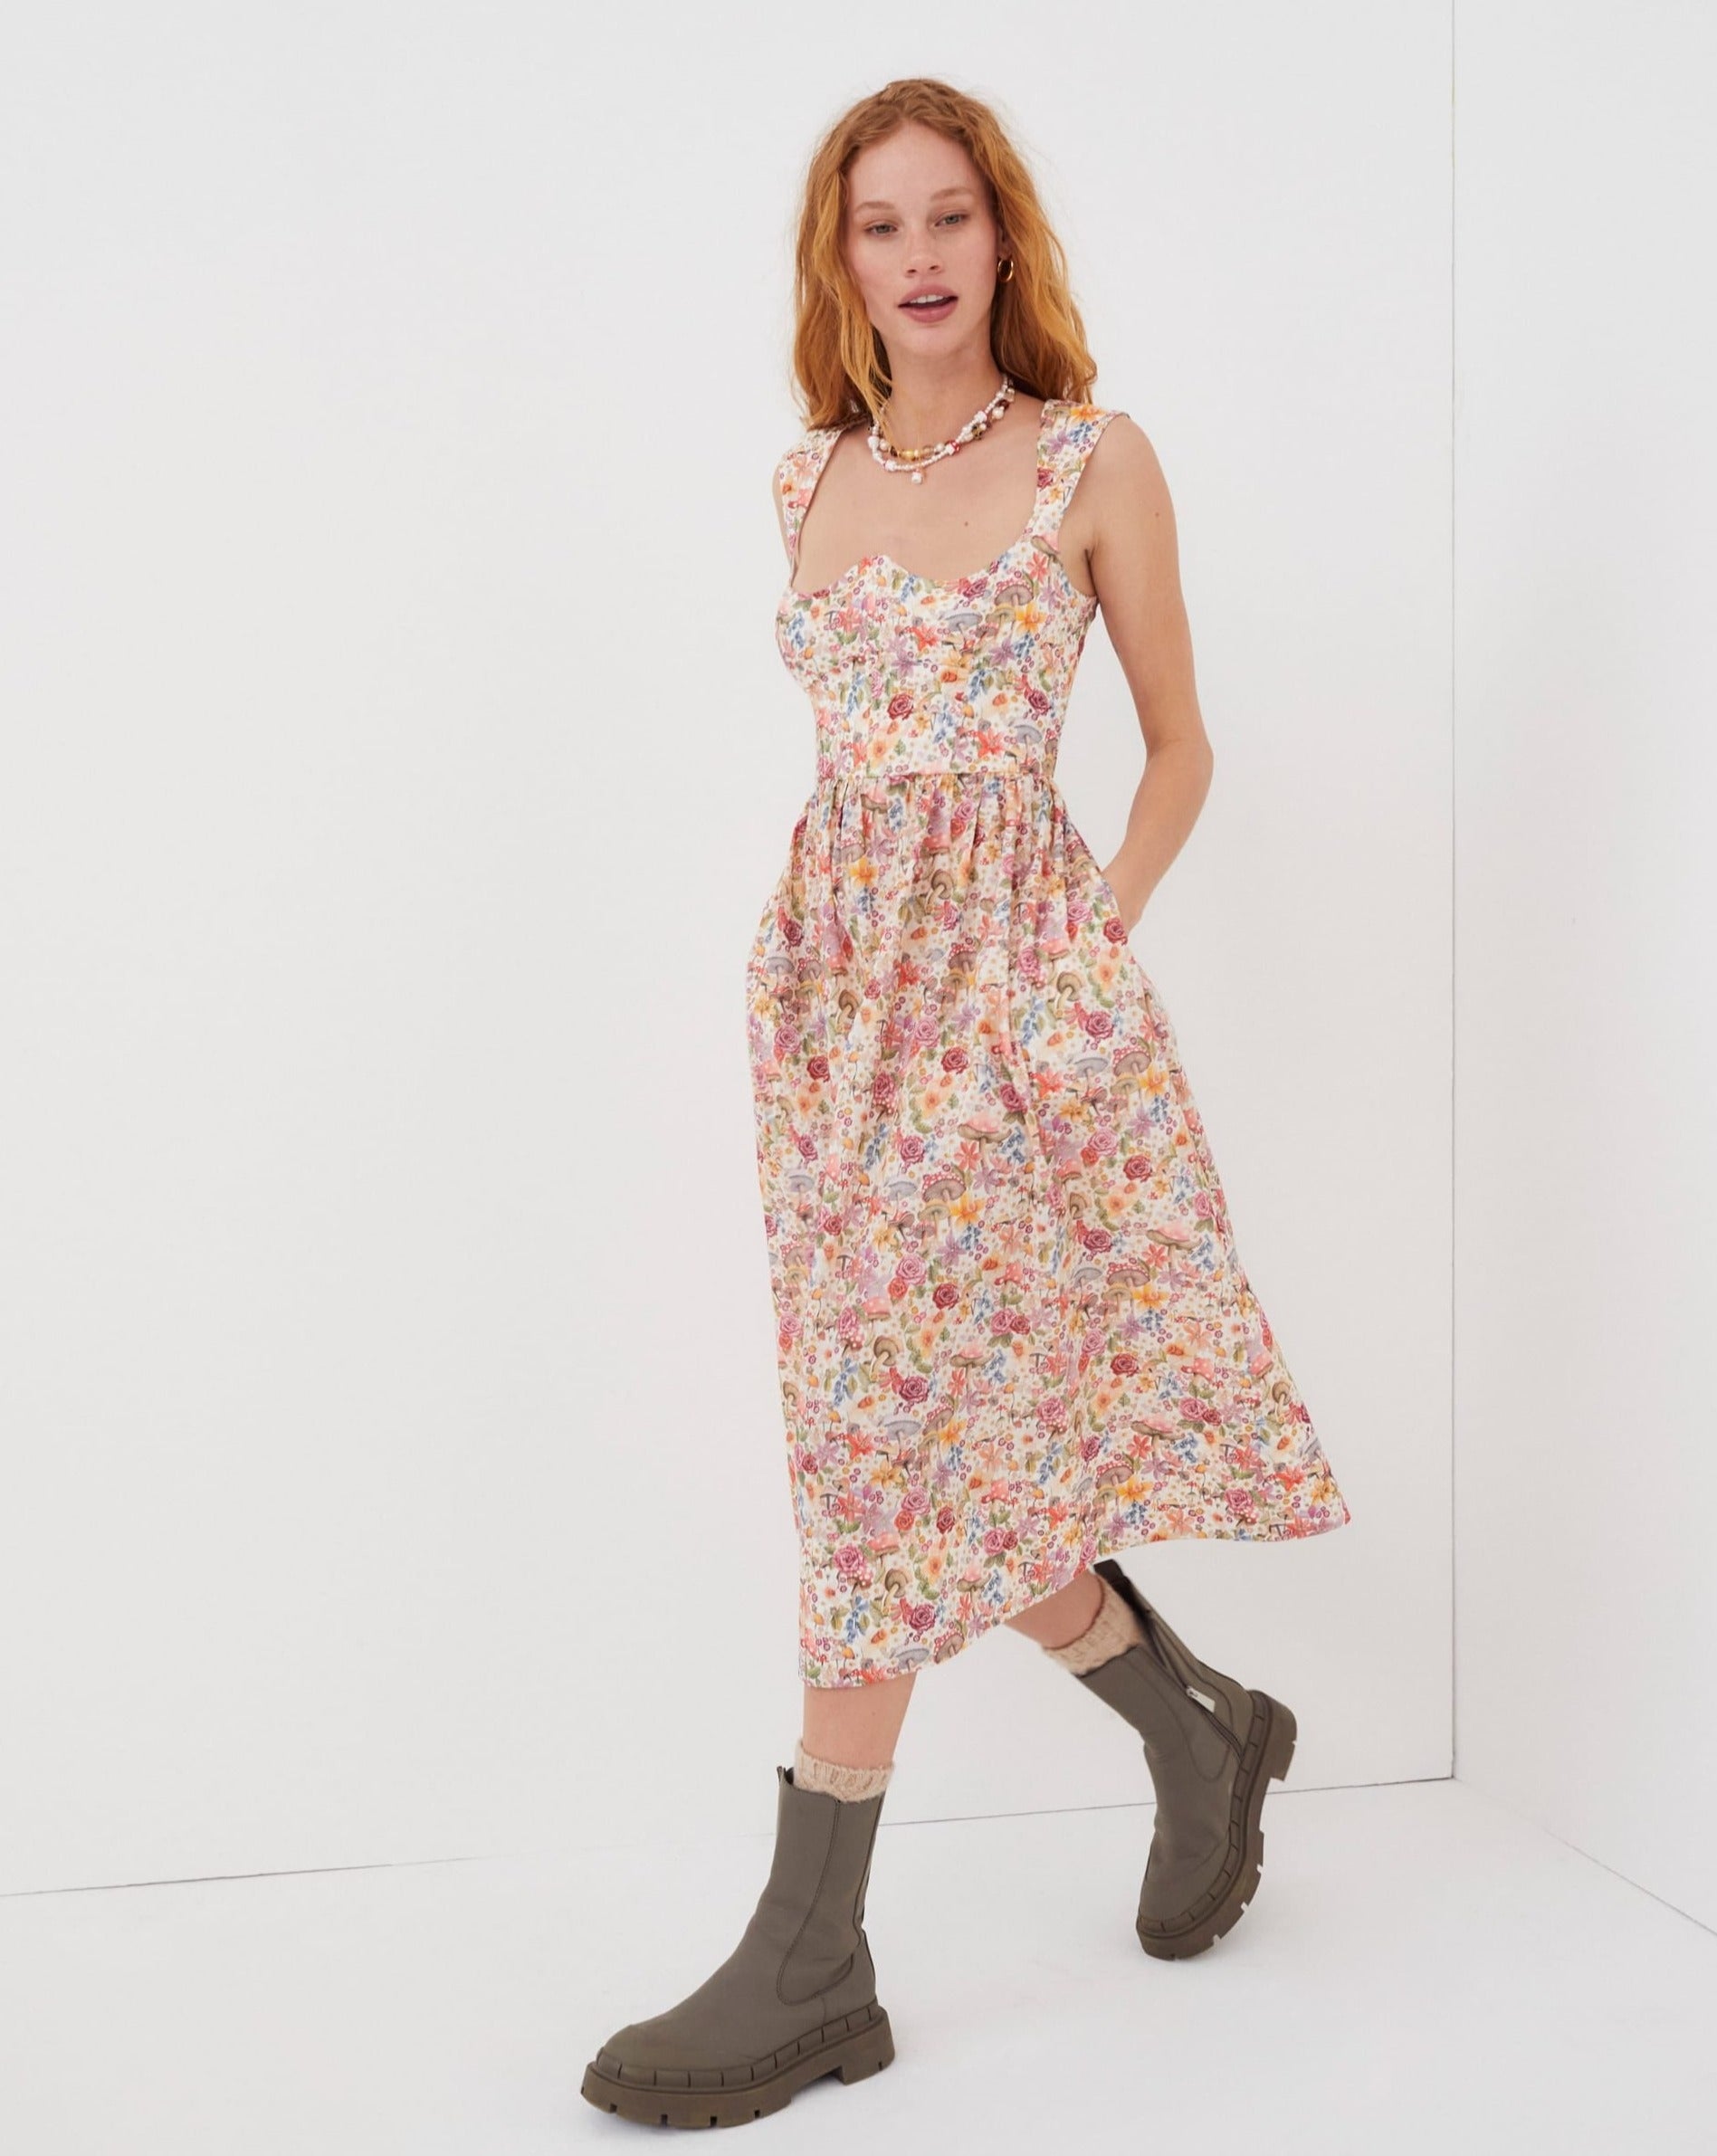 20+ Midi Dresses for Spring - FROM LUXE WITH LOVE